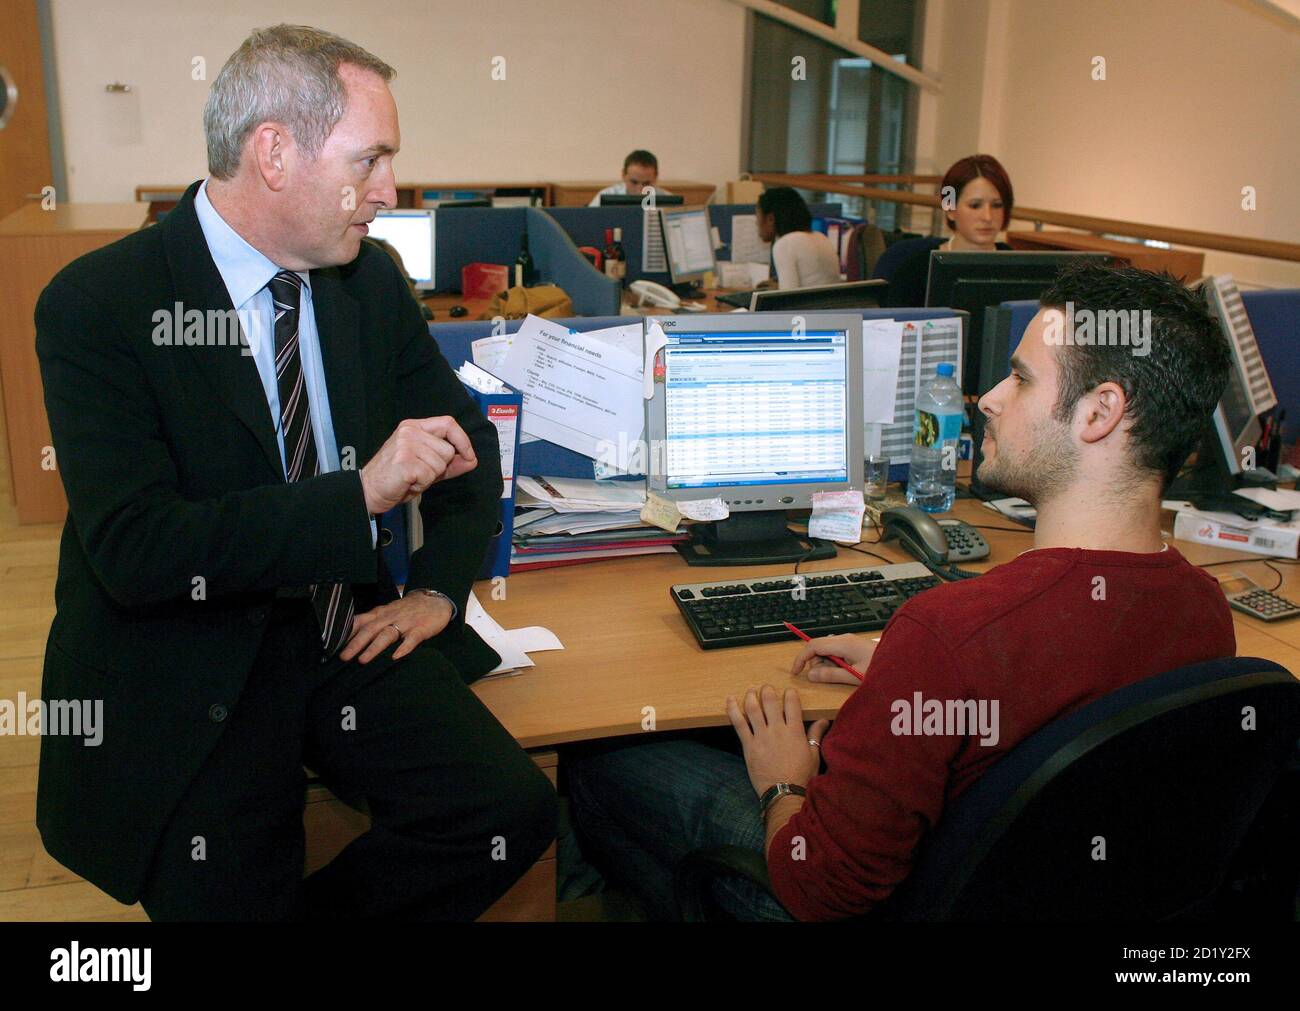 Britain's Work and Pensions Secretary John Hutton (L) meets an employee at i-level in London December 12, 2006. The government will unveil far-reaching pension proposals on Tuesday that could see workers enrolled automatically into schemes as part of a plan to plug the nation's estimated 57 billion pounds ($112 billion) savings gap. REUTERS/Kieran Doherty  (BRITAIN) Stock Photo